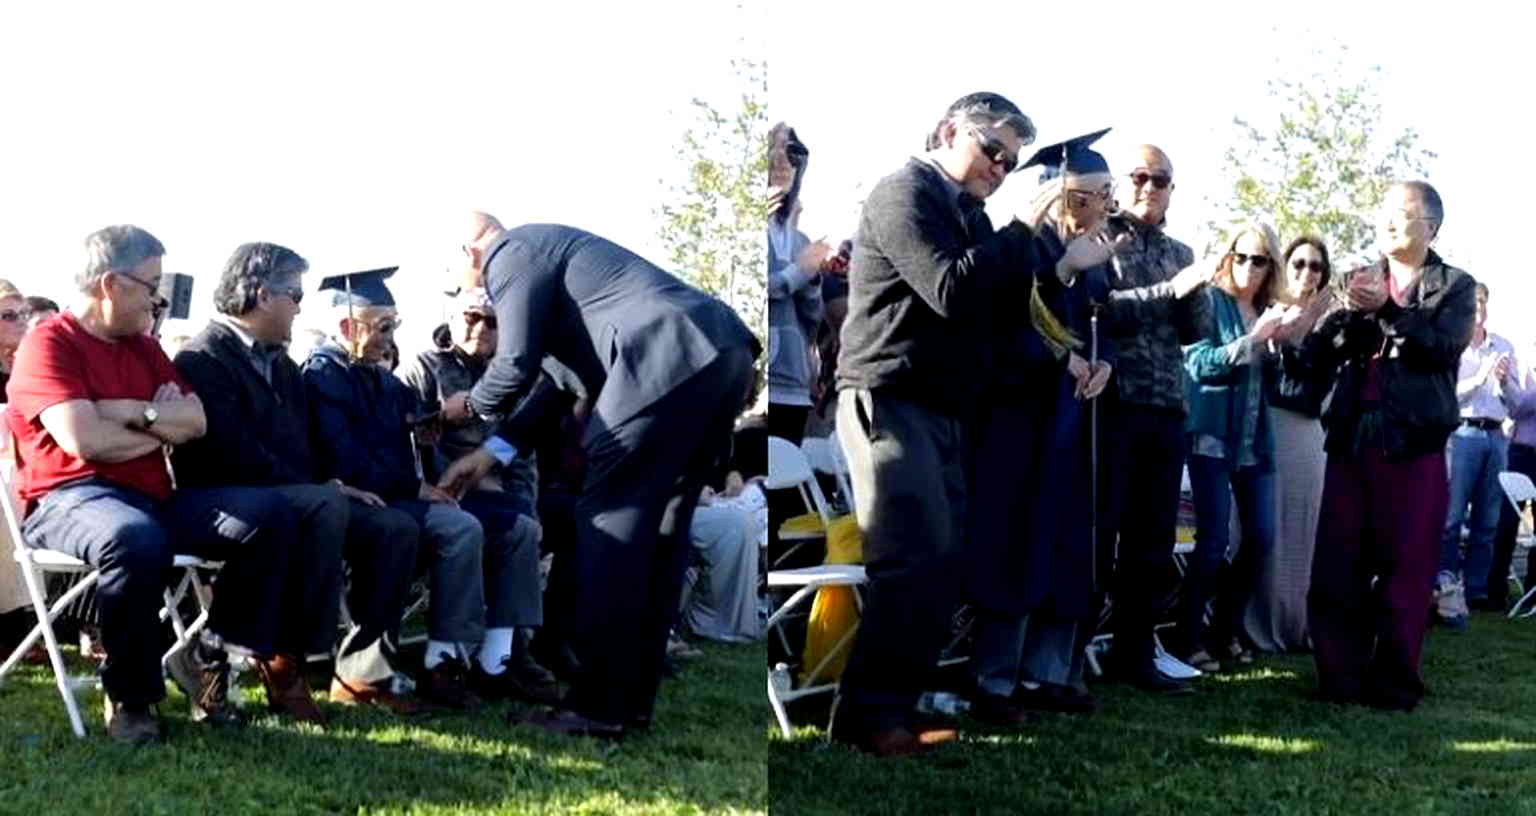 Grandpa Who Didn’t Finish High School Because of WW2 Concentration Camps Graduates With Grandson